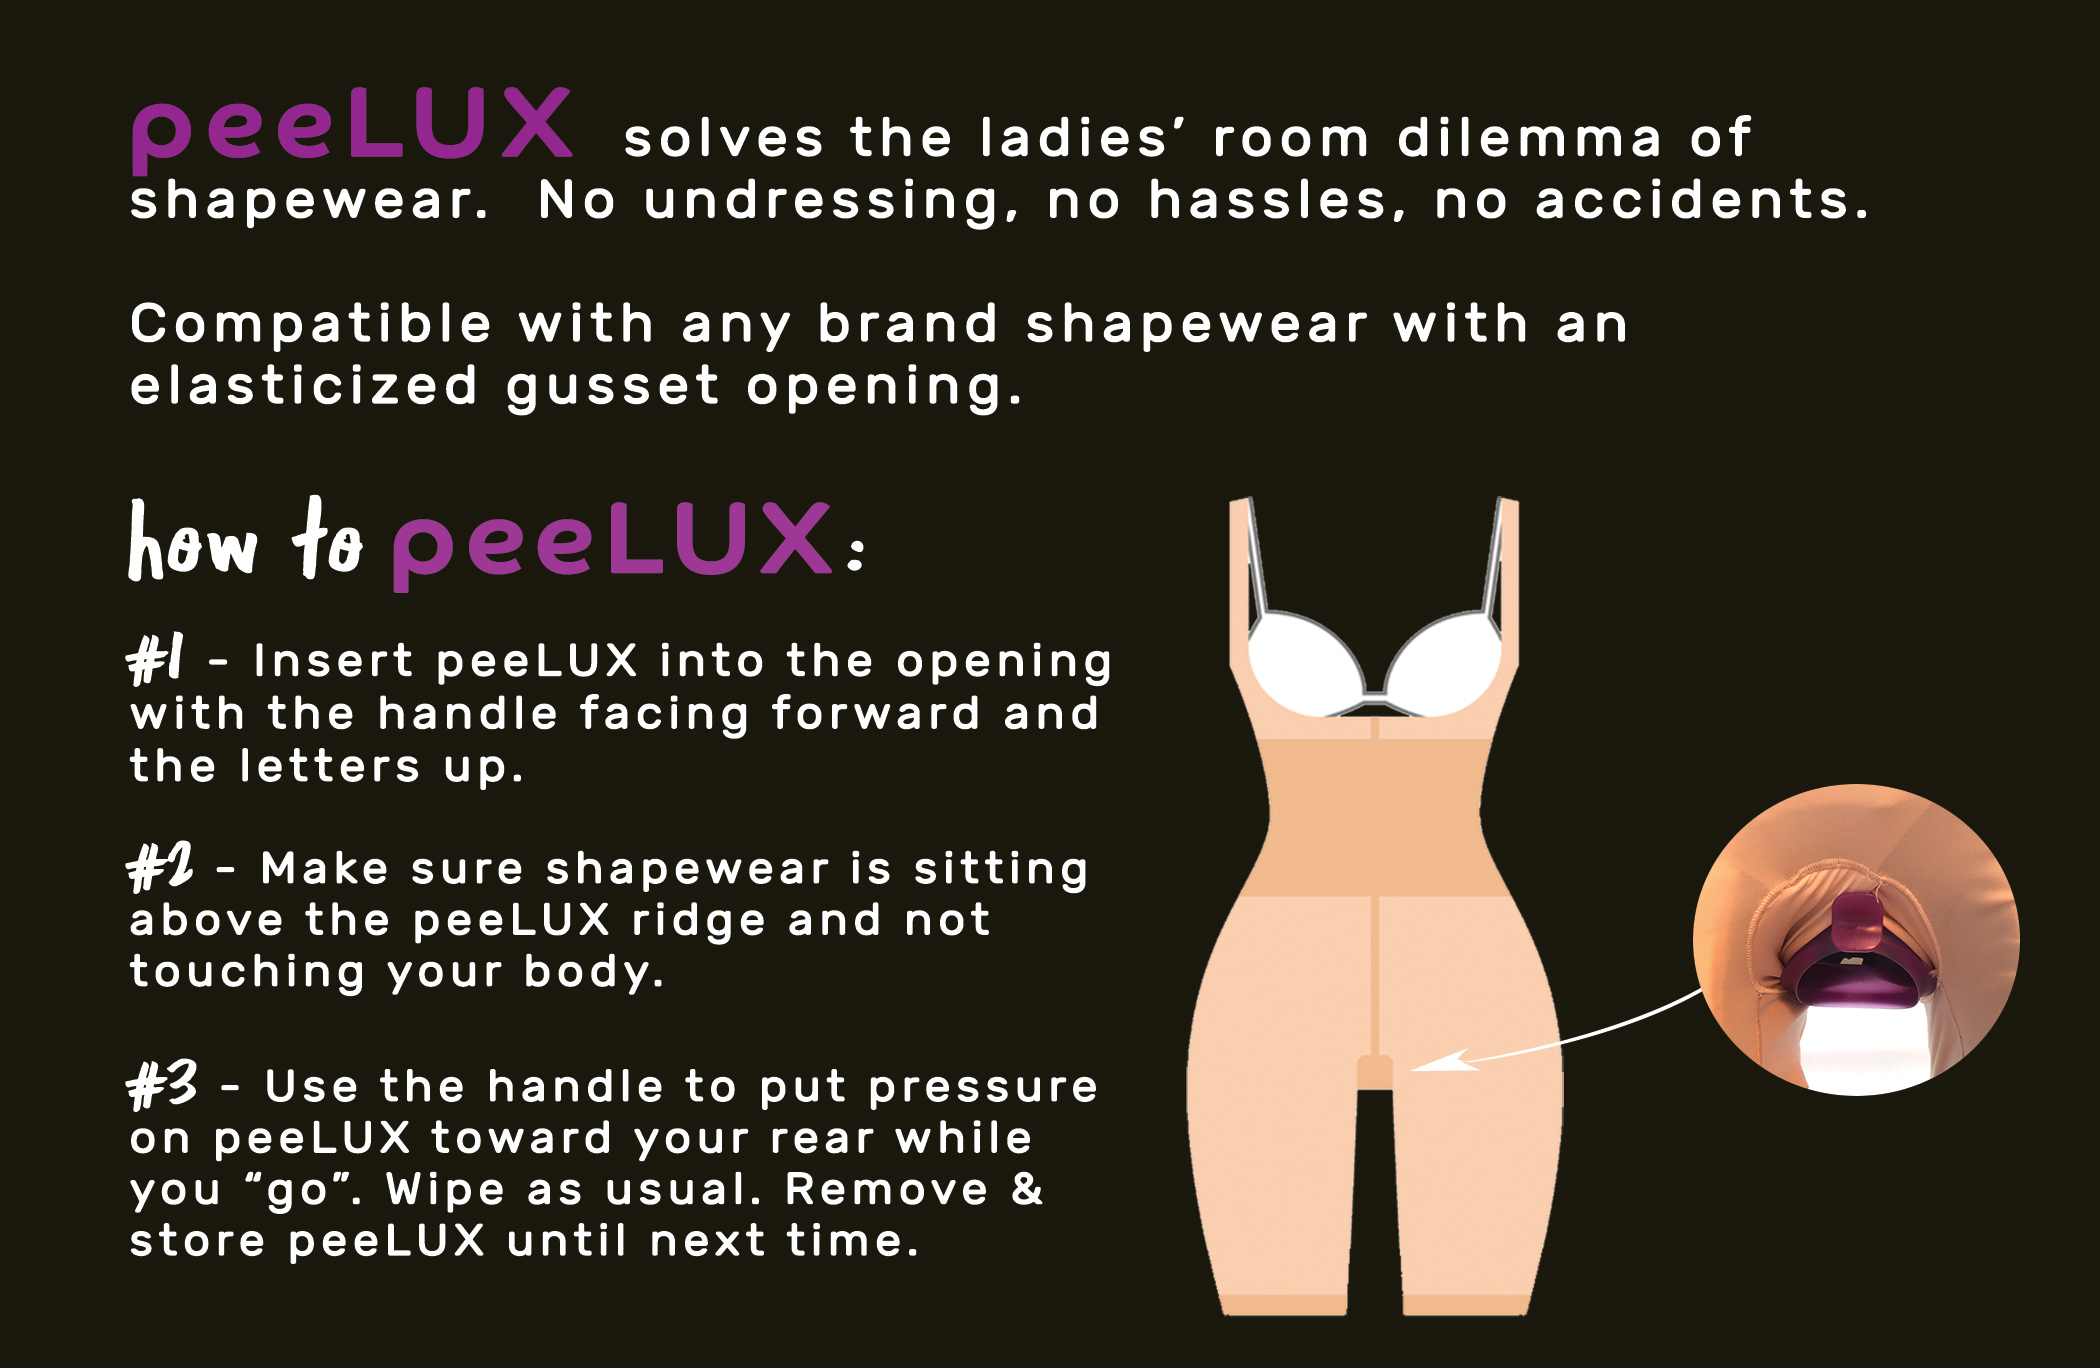 How To Use The Spanx Gusset — peeLUX - peeing in shapewear made easy